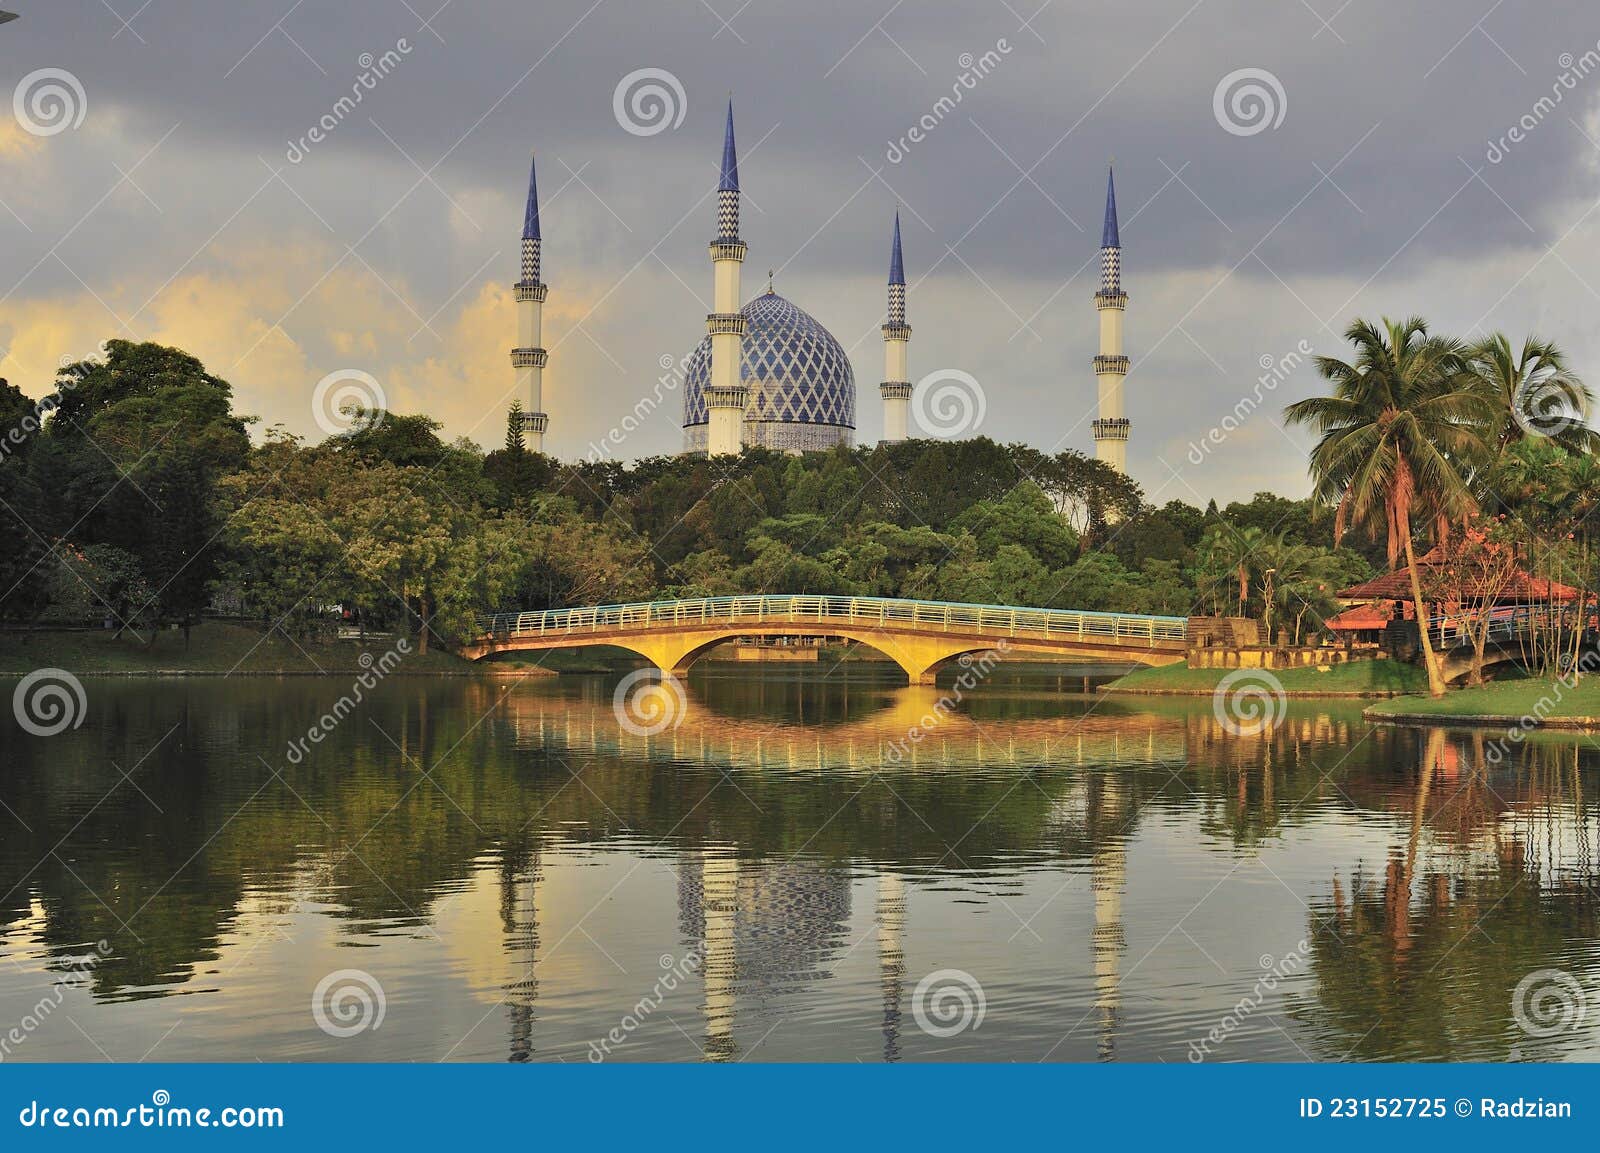 mosque minaret and dome with reflection